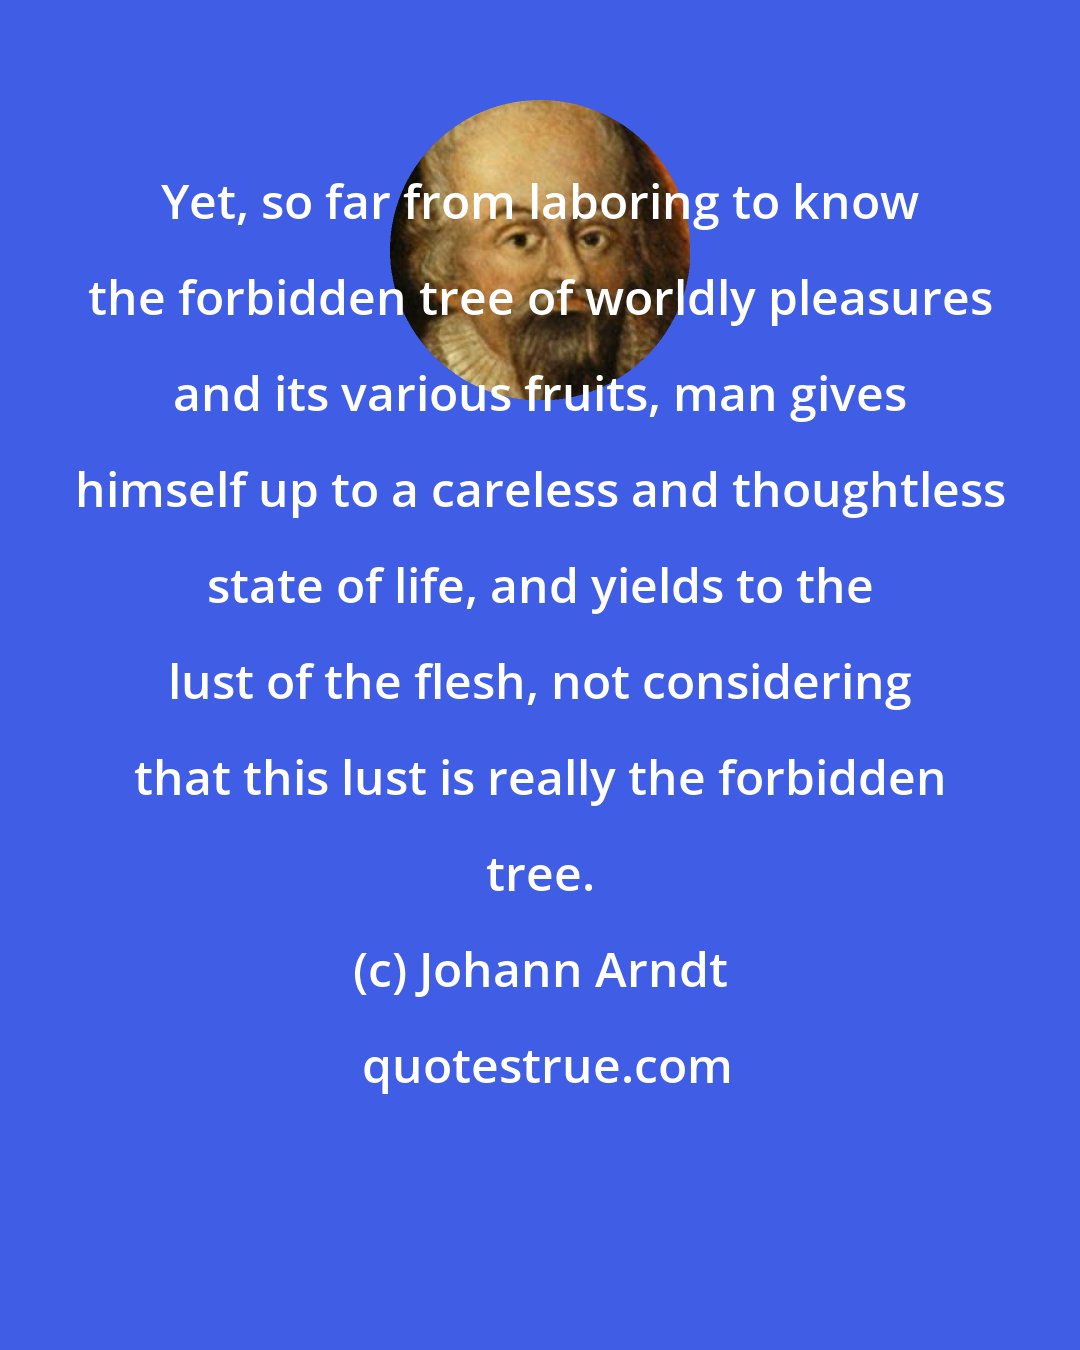 Johann Arndt: Yet, so far from laboring to know the forbidden tree of worldly pleasures and its various fruits, man gives himself up to a careless and thoughtless state of life, and yields to the lust of the flesh, not considering that this lust is really the forbidden tree.